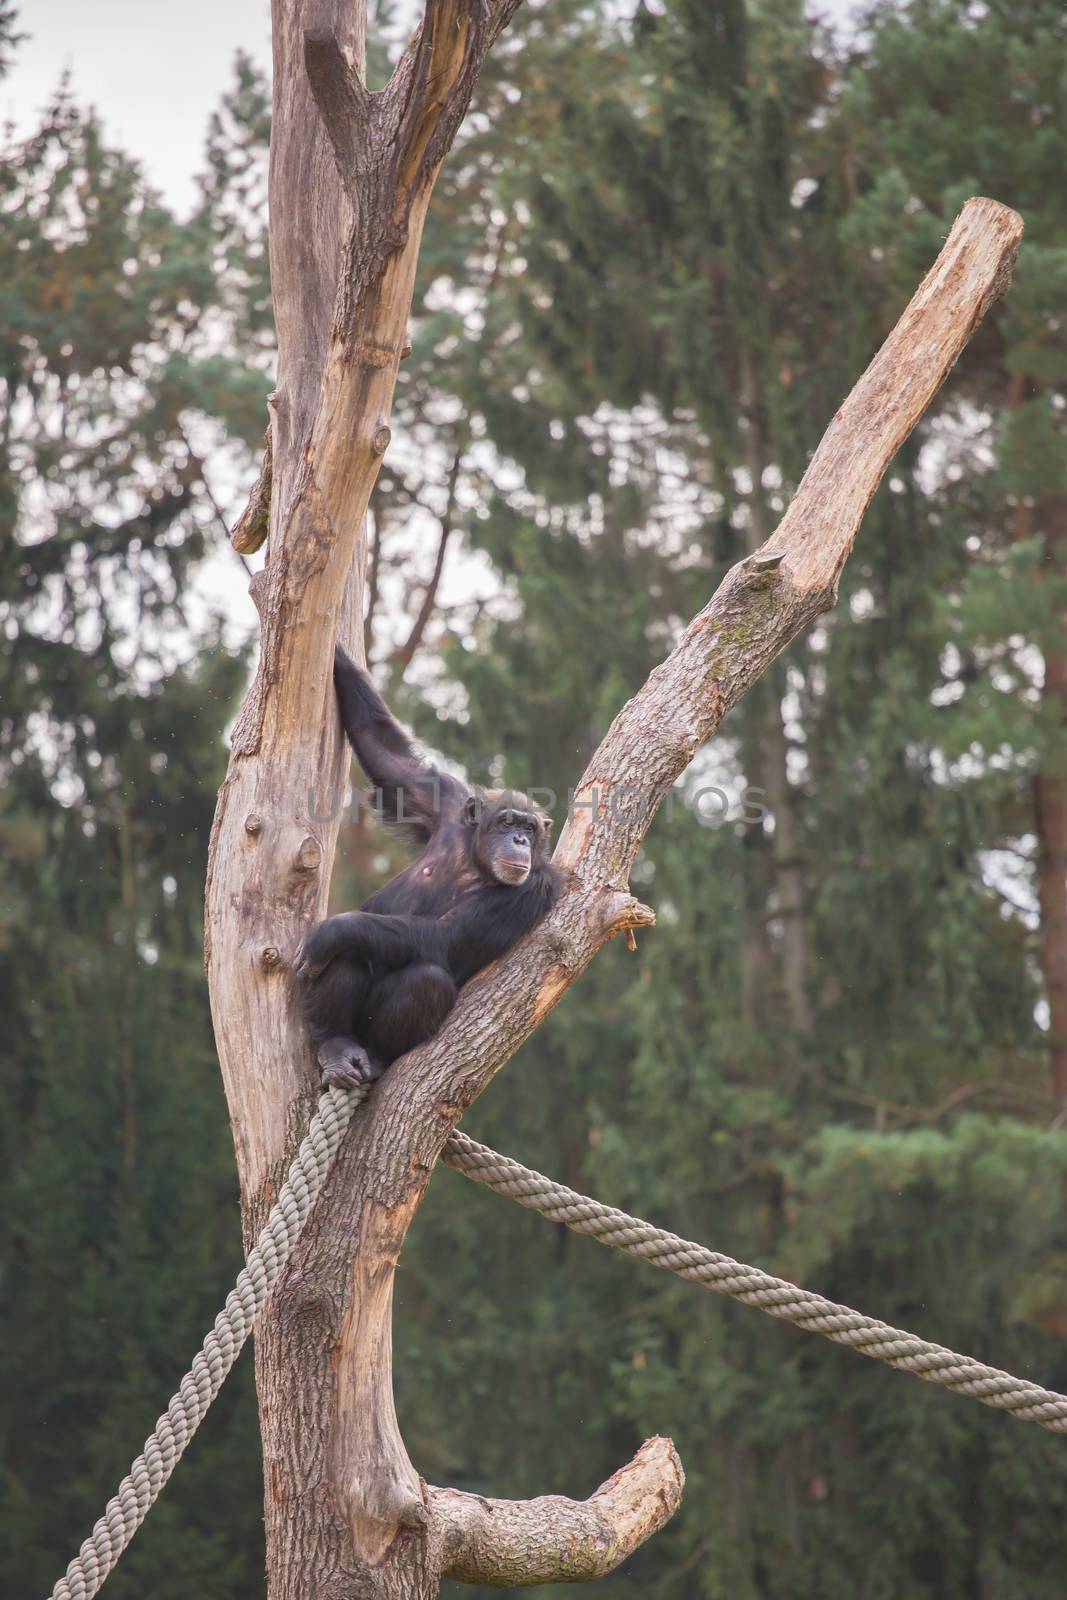 A chimpanzee on a wooden scaffold